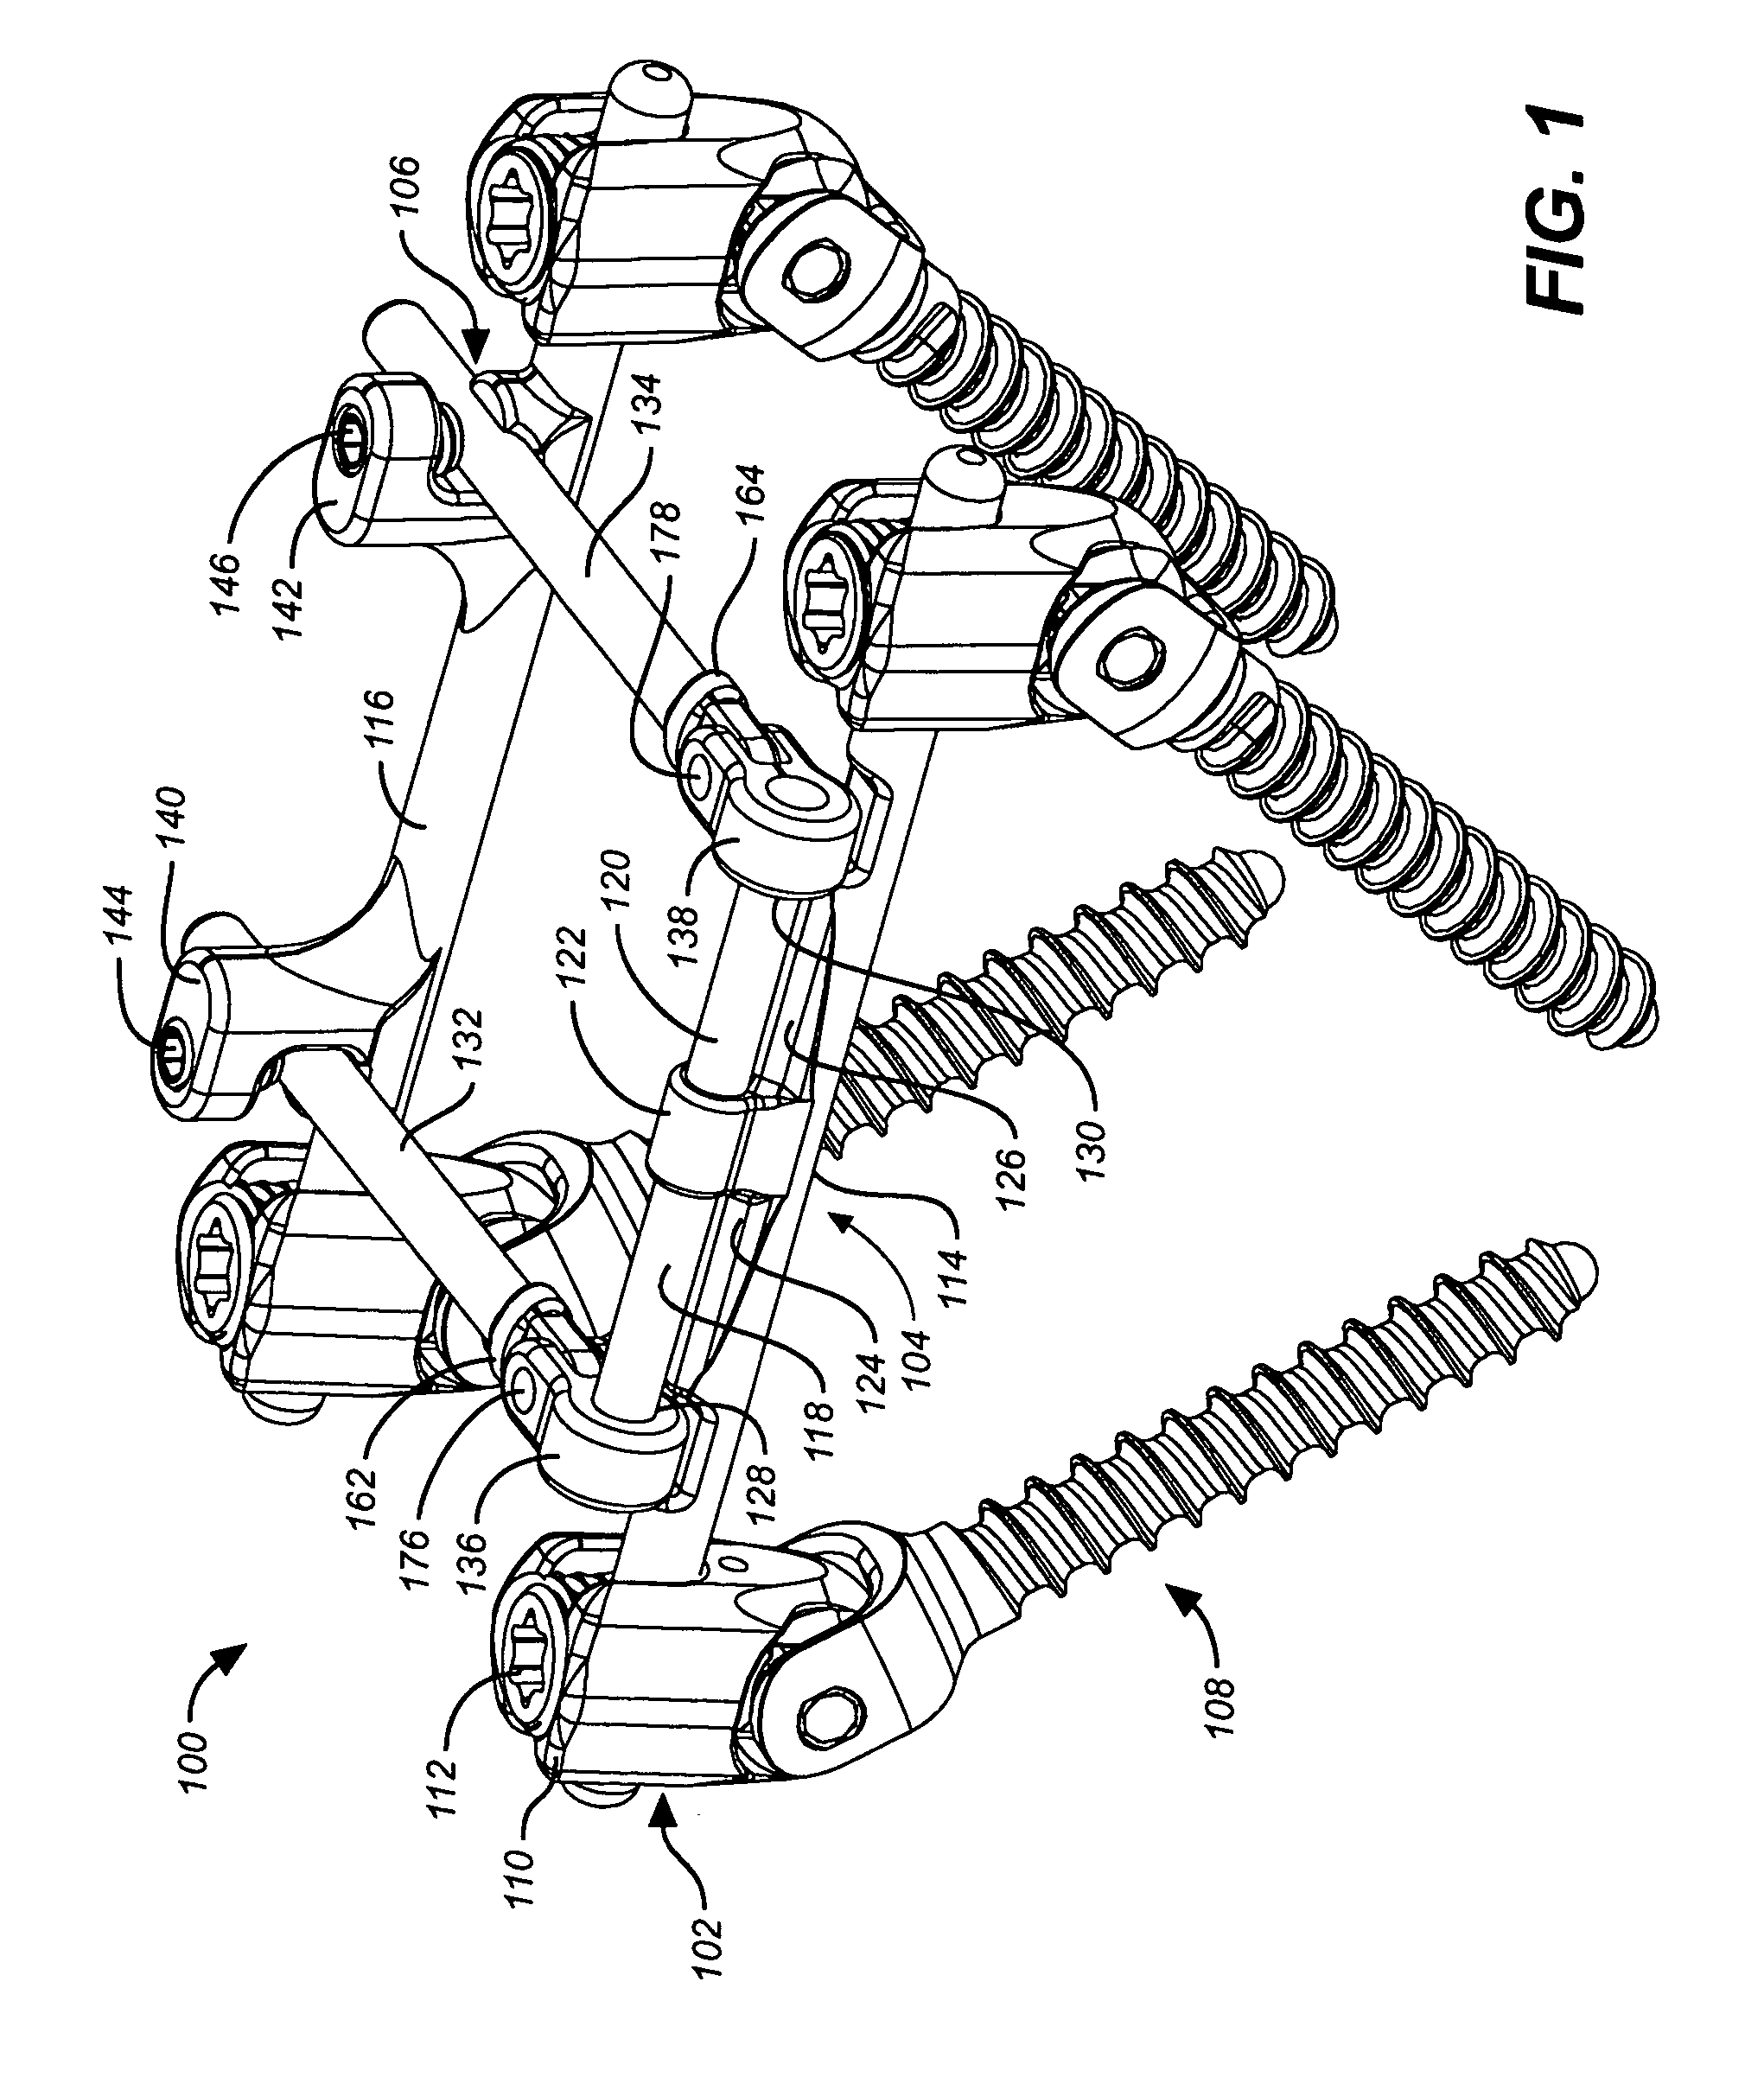 Deflection rod system for spine implant with end connectors and method